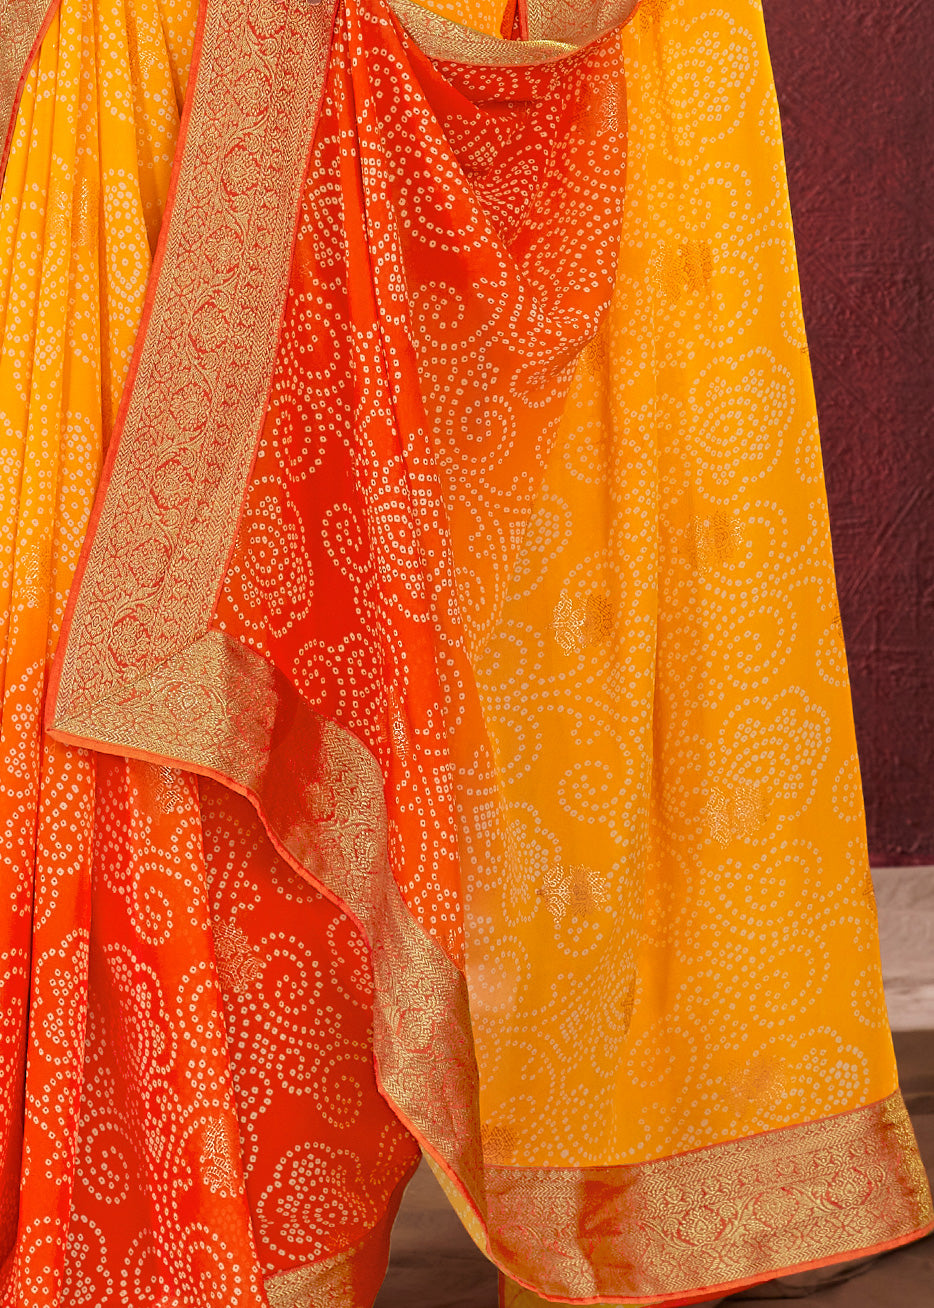 Dual Shades Bandhani Printed Orange Yellow Weightless Georgette Saree With Embroidery Lace